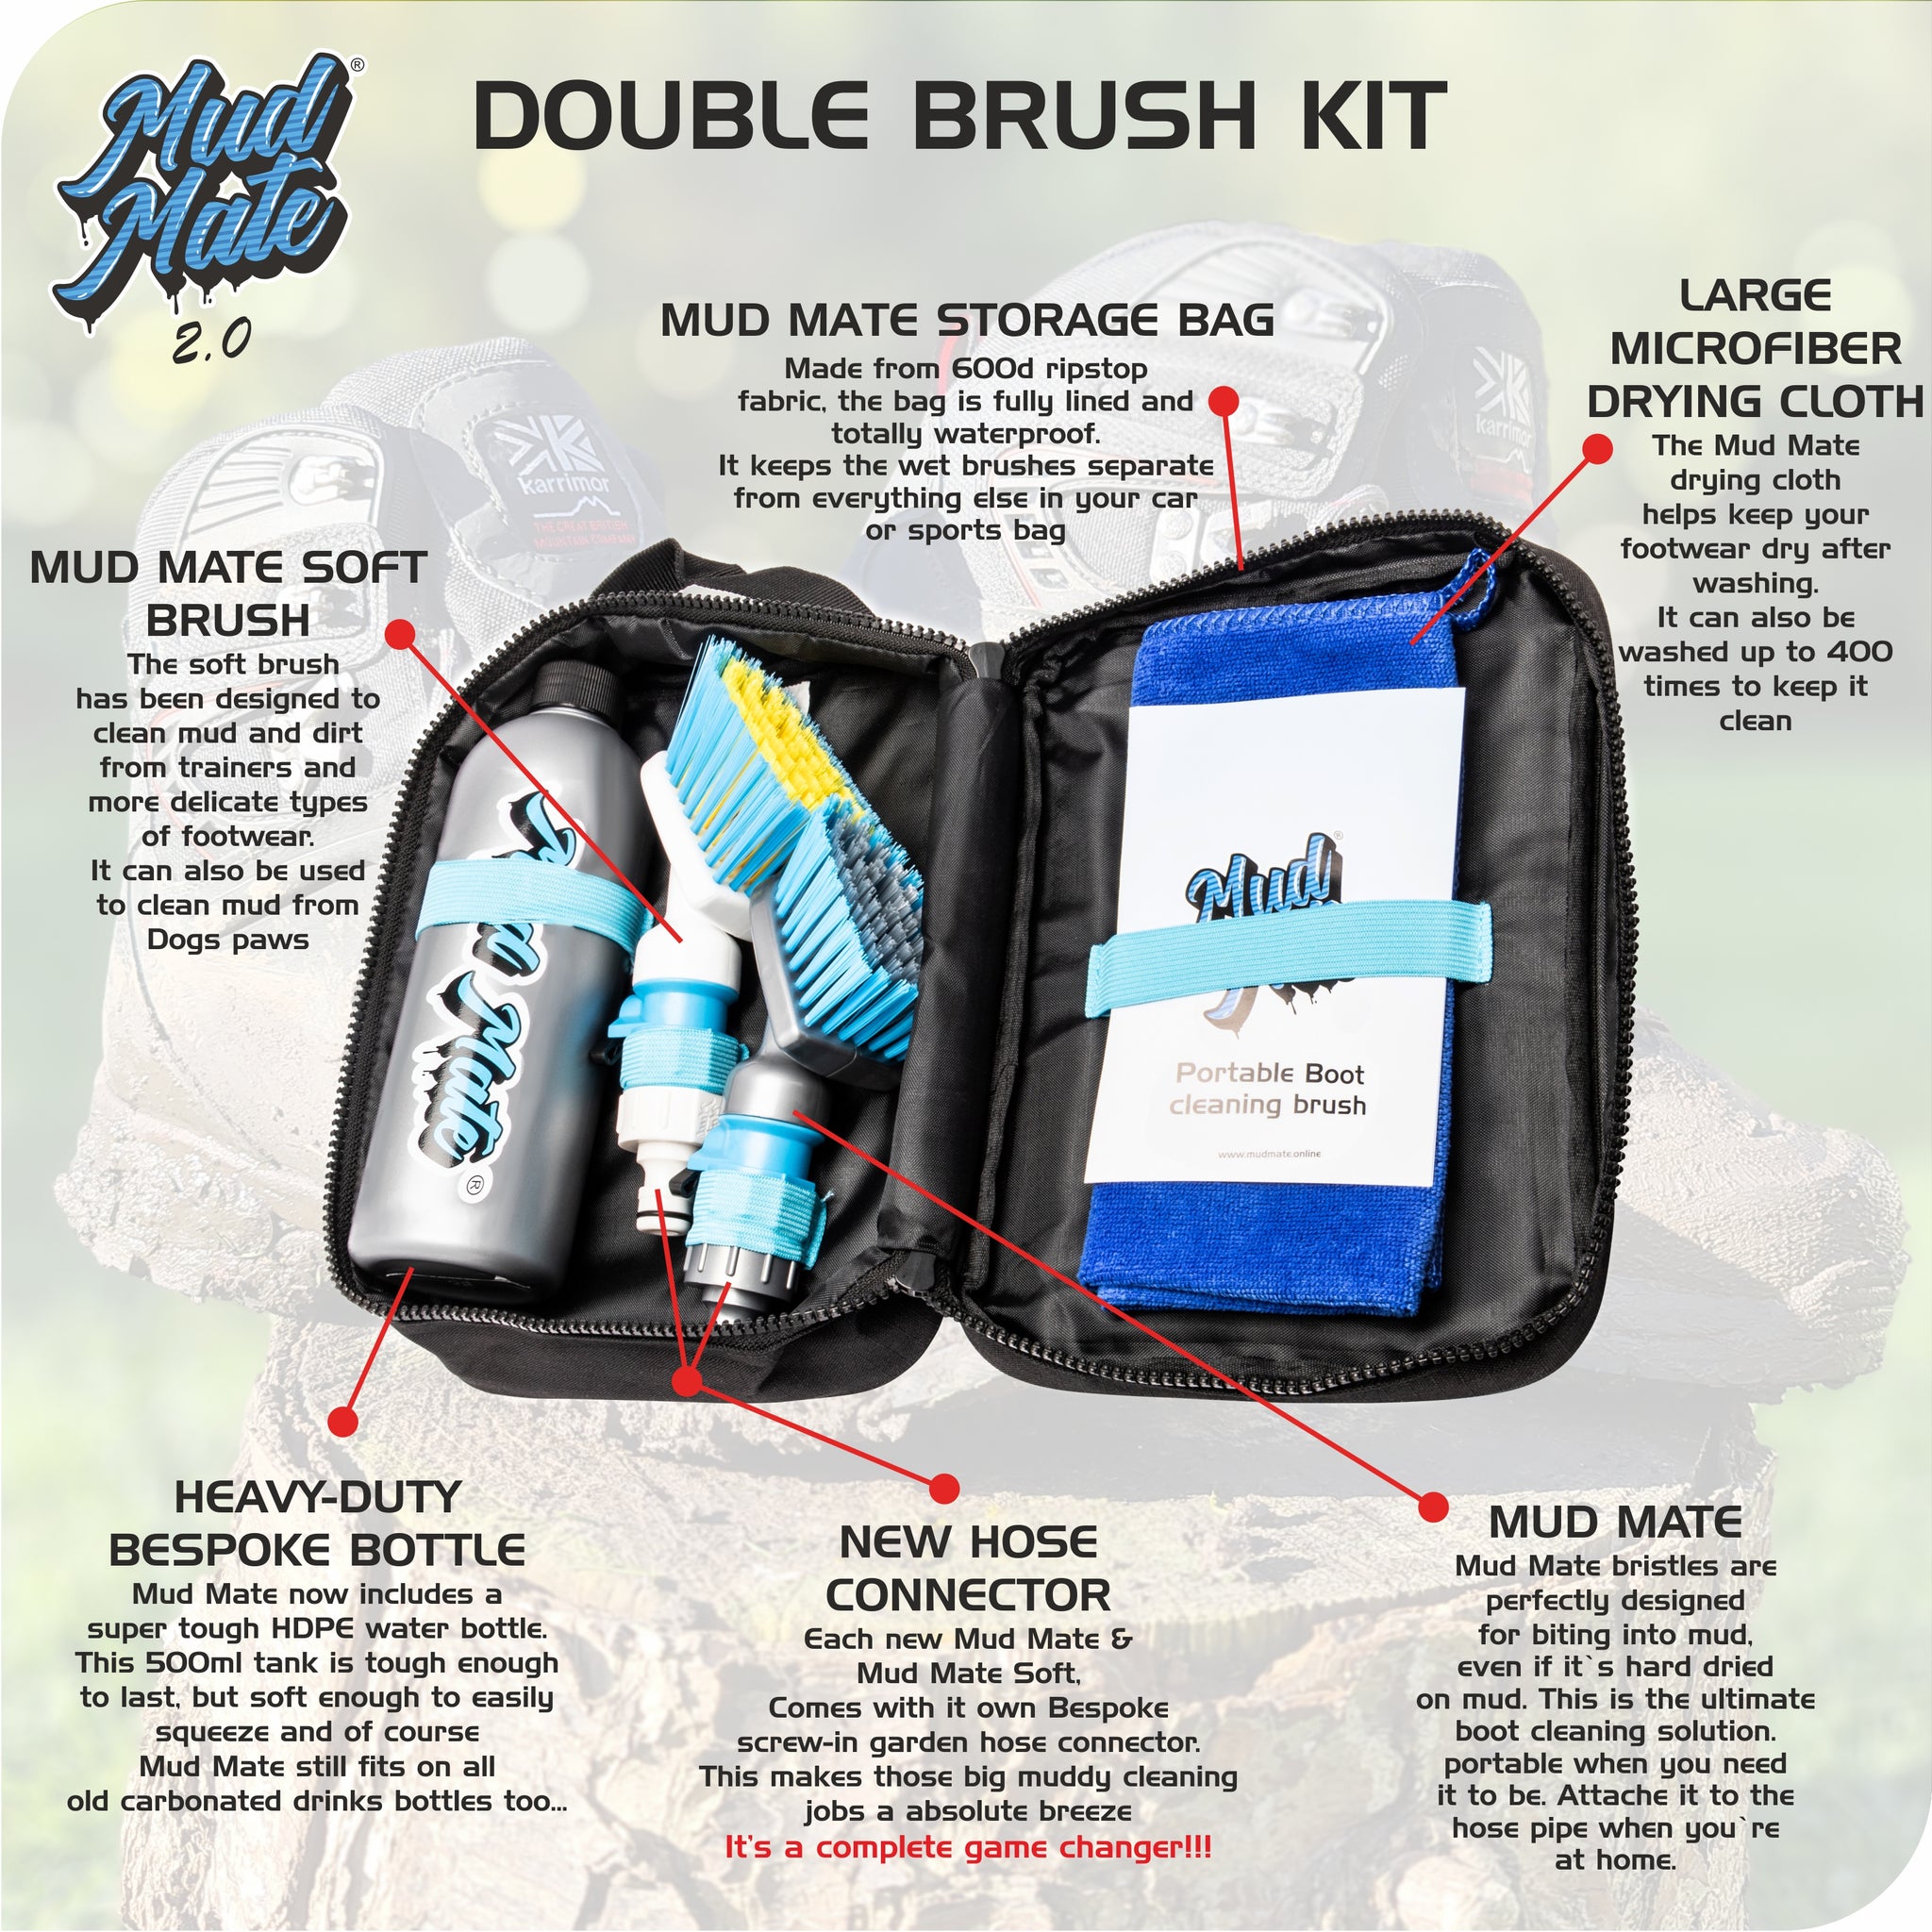 The double brush kit from Mud Mate is the most effective boot and shoe cleaning system available.